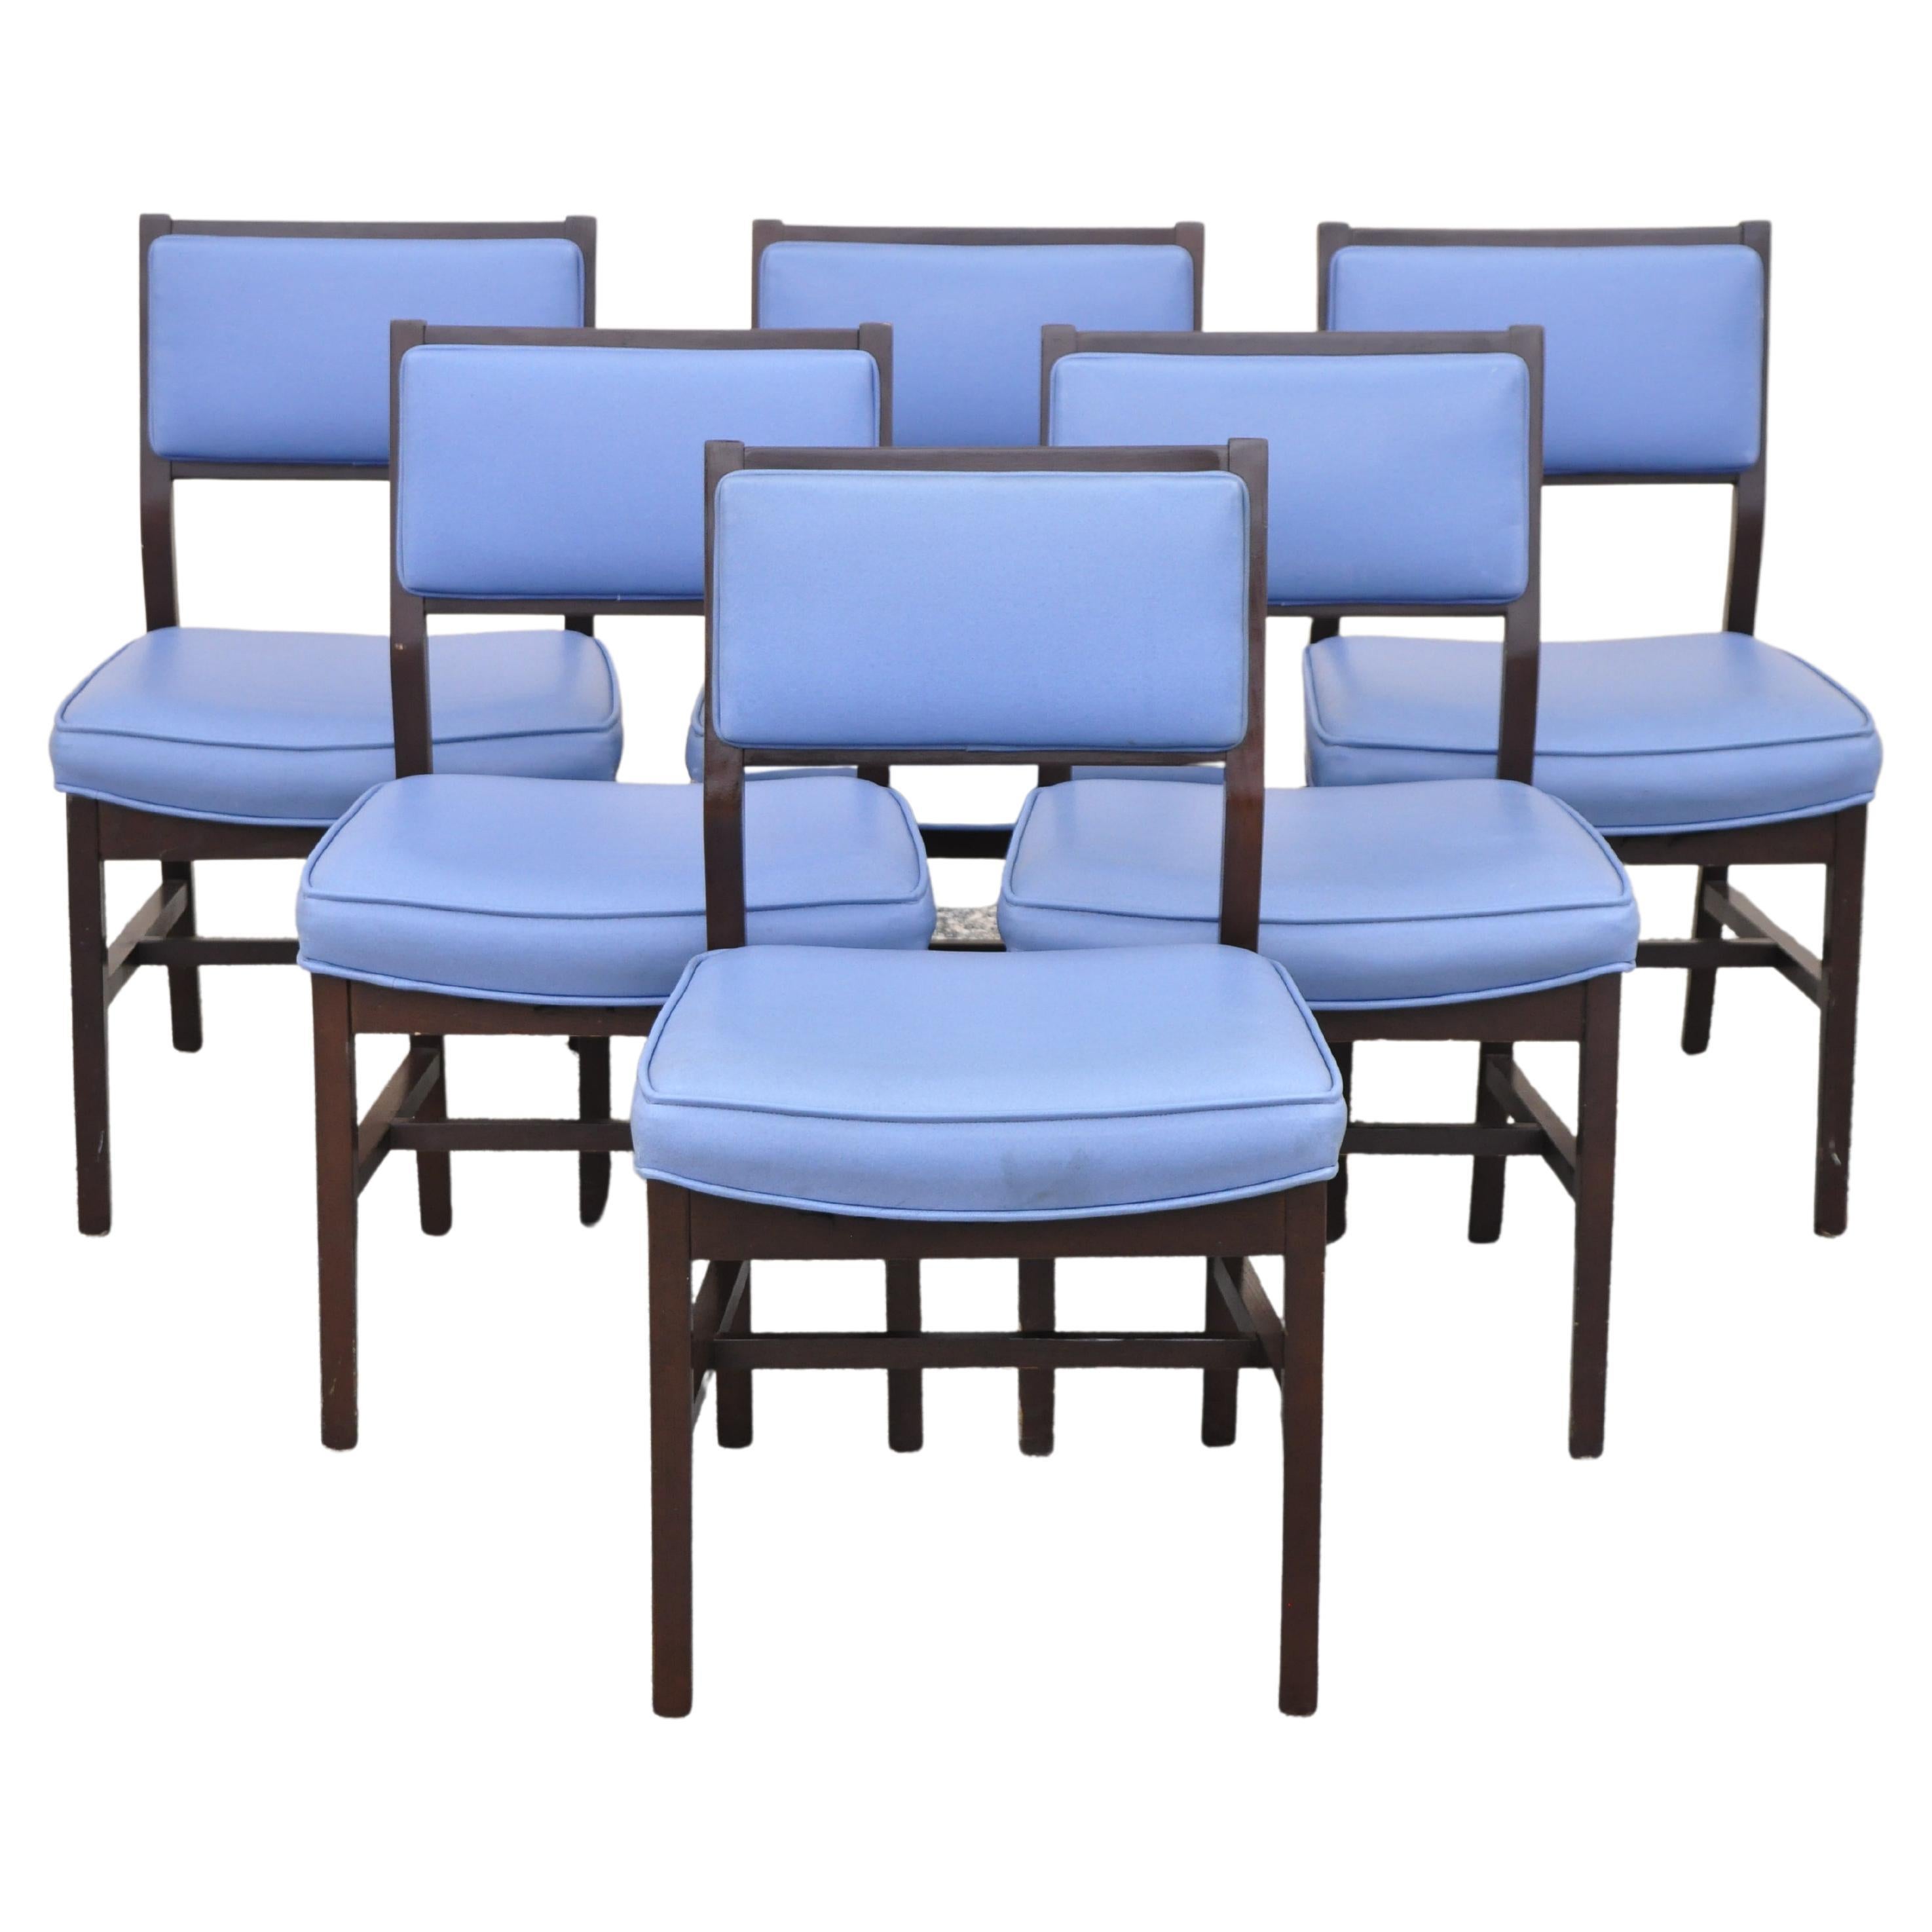 Vintage Mid Century Modern Jens Risom Style Blue Sculpted Dining Chair -Set of 6 For Sale